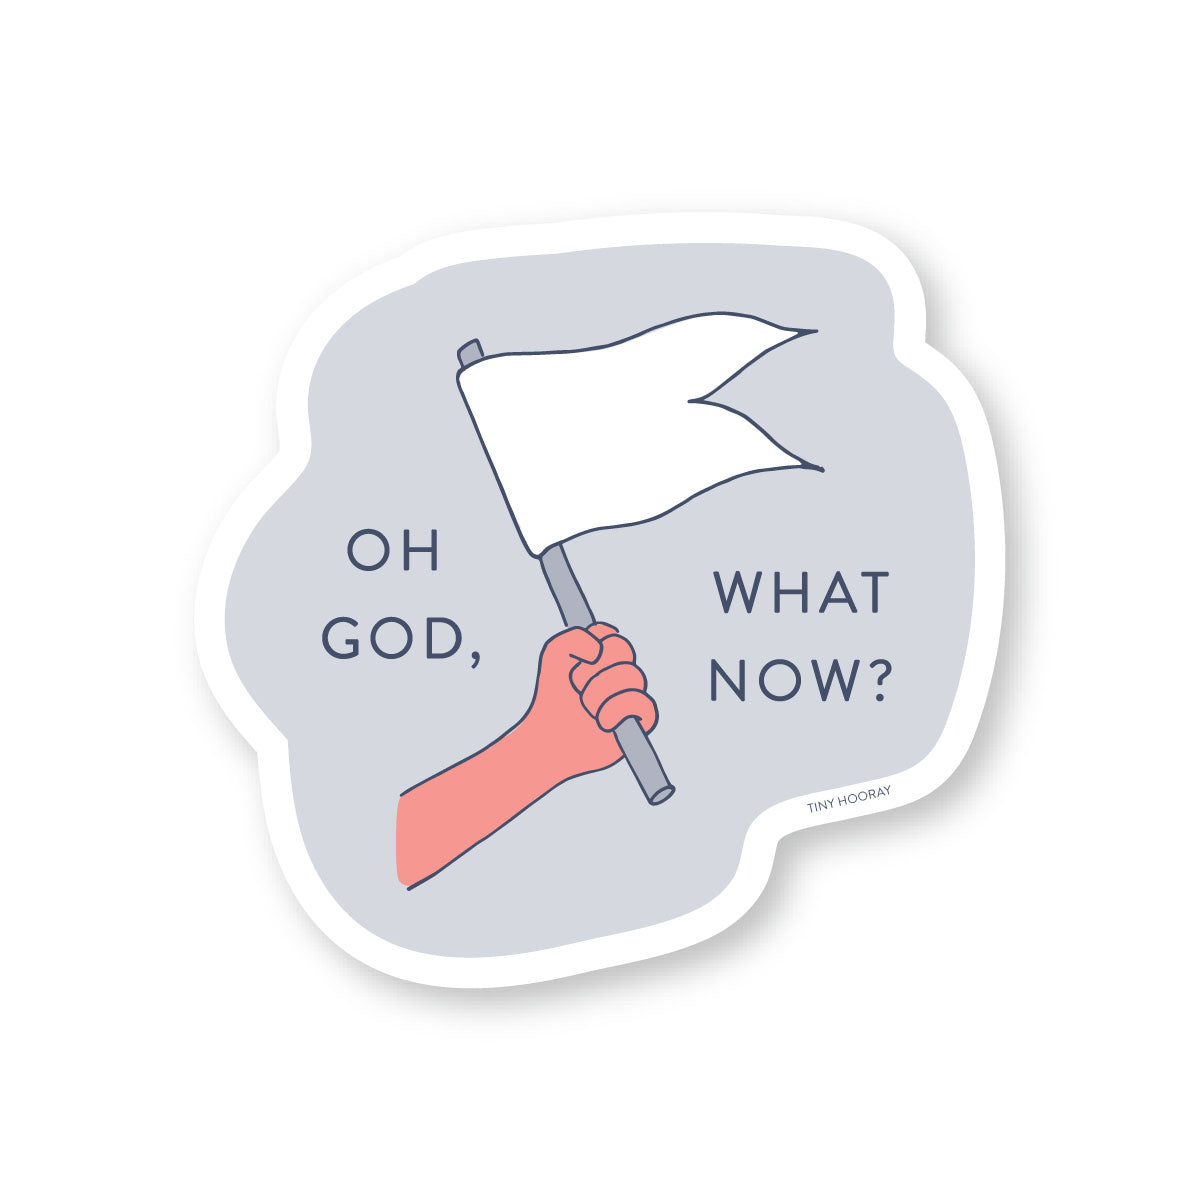 Oh God, What Now? Sticker